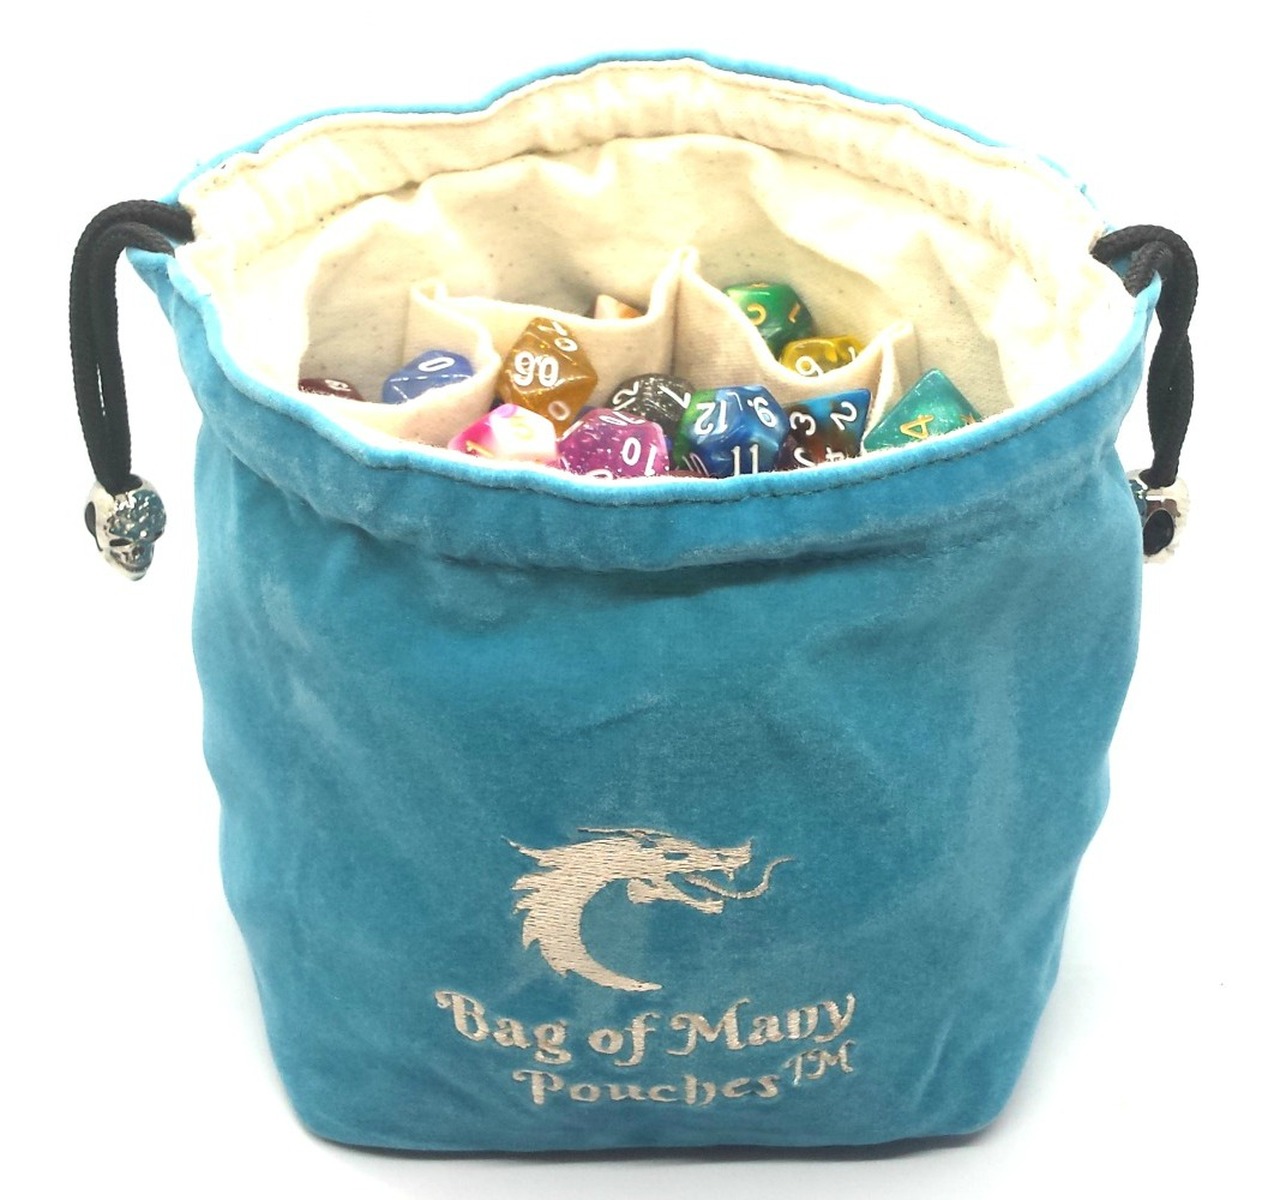 Bag of Many Pouches Rpg Dnd Dice Bag Teal